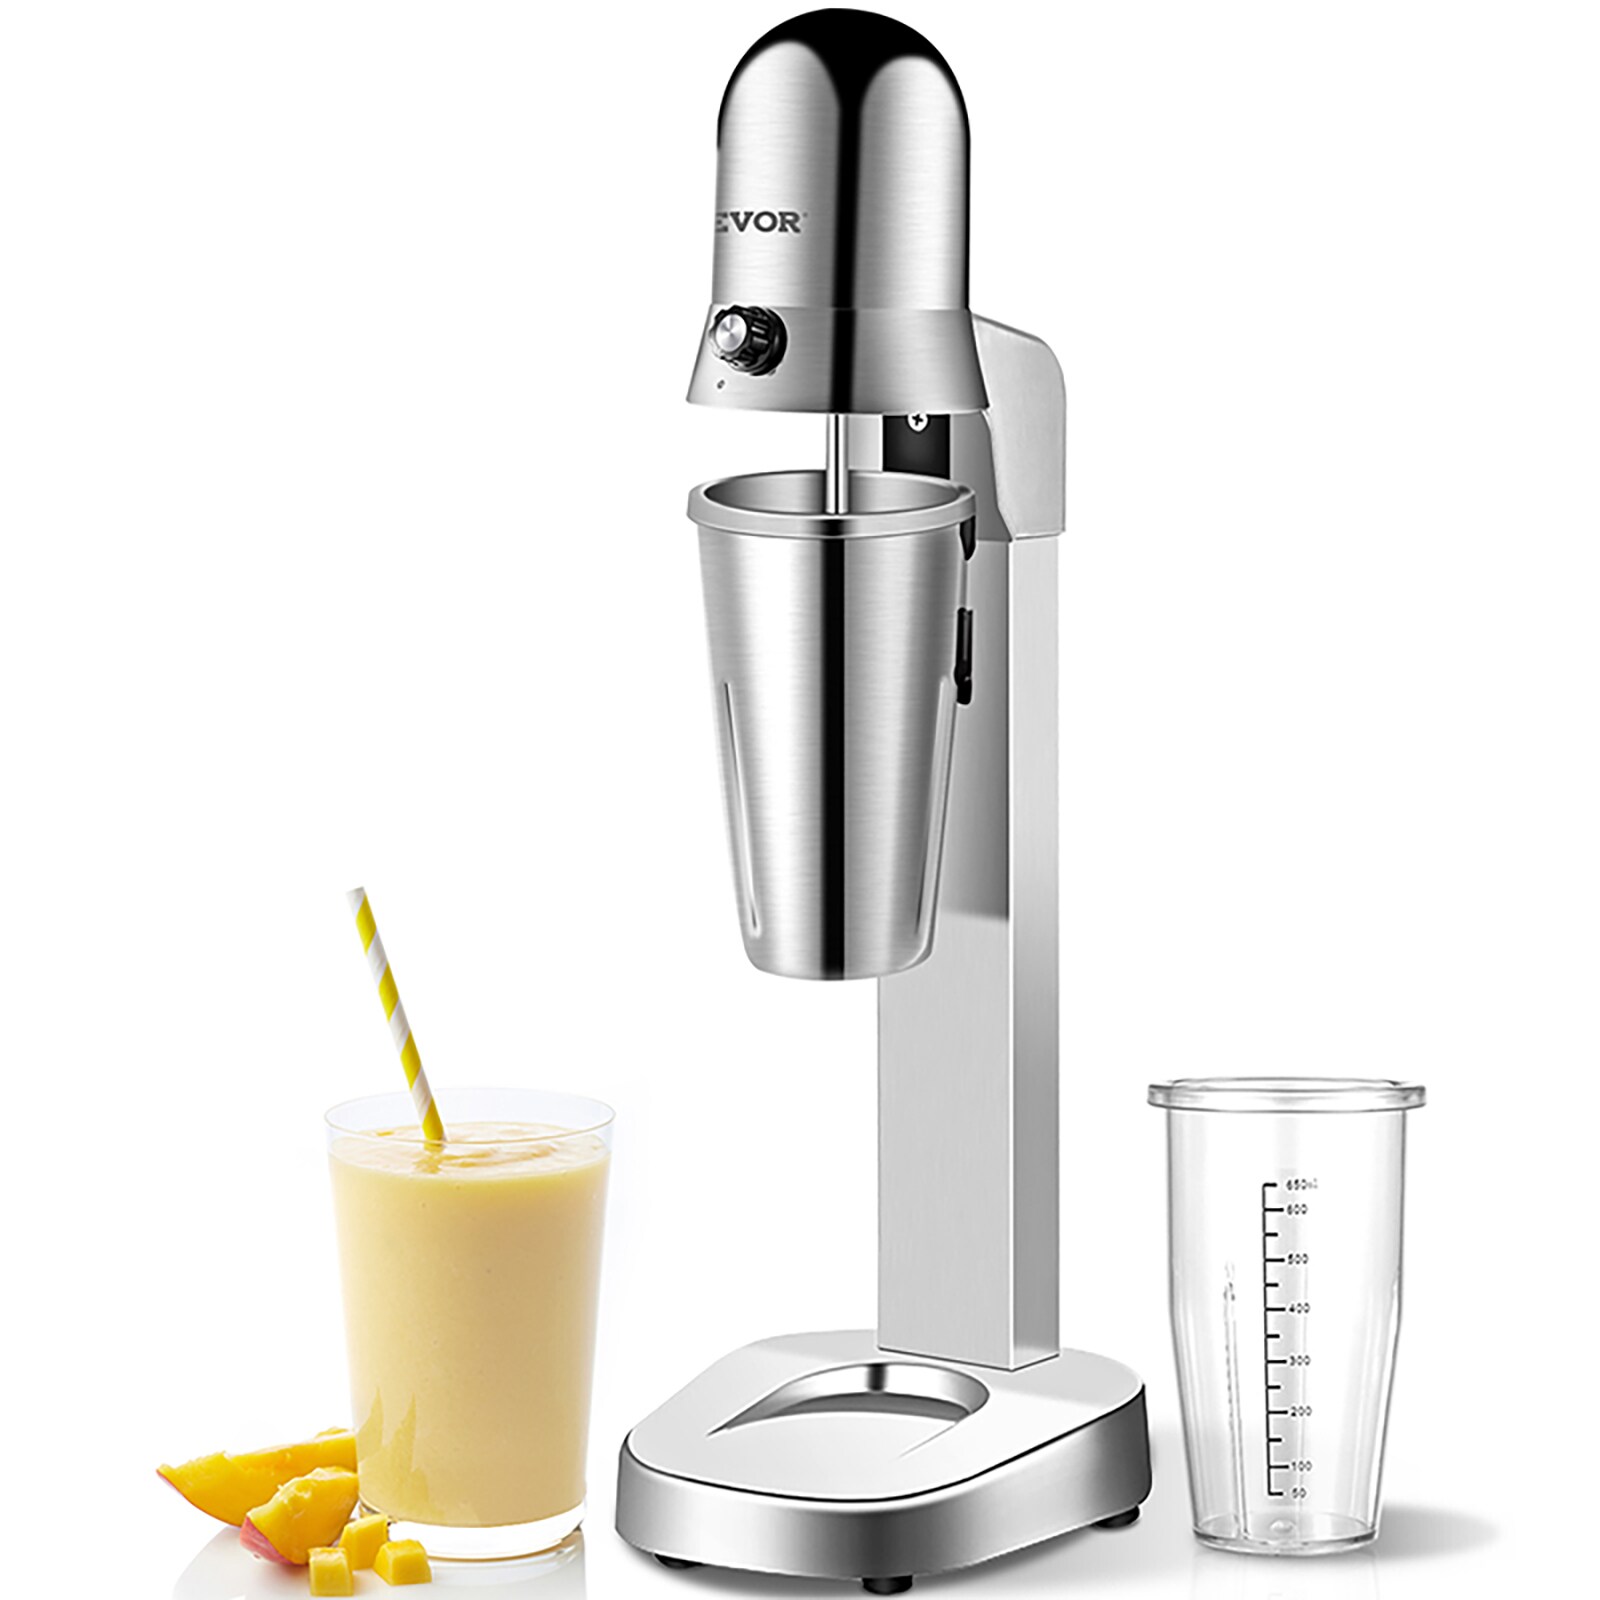 Cocktail maker Small Appliances at